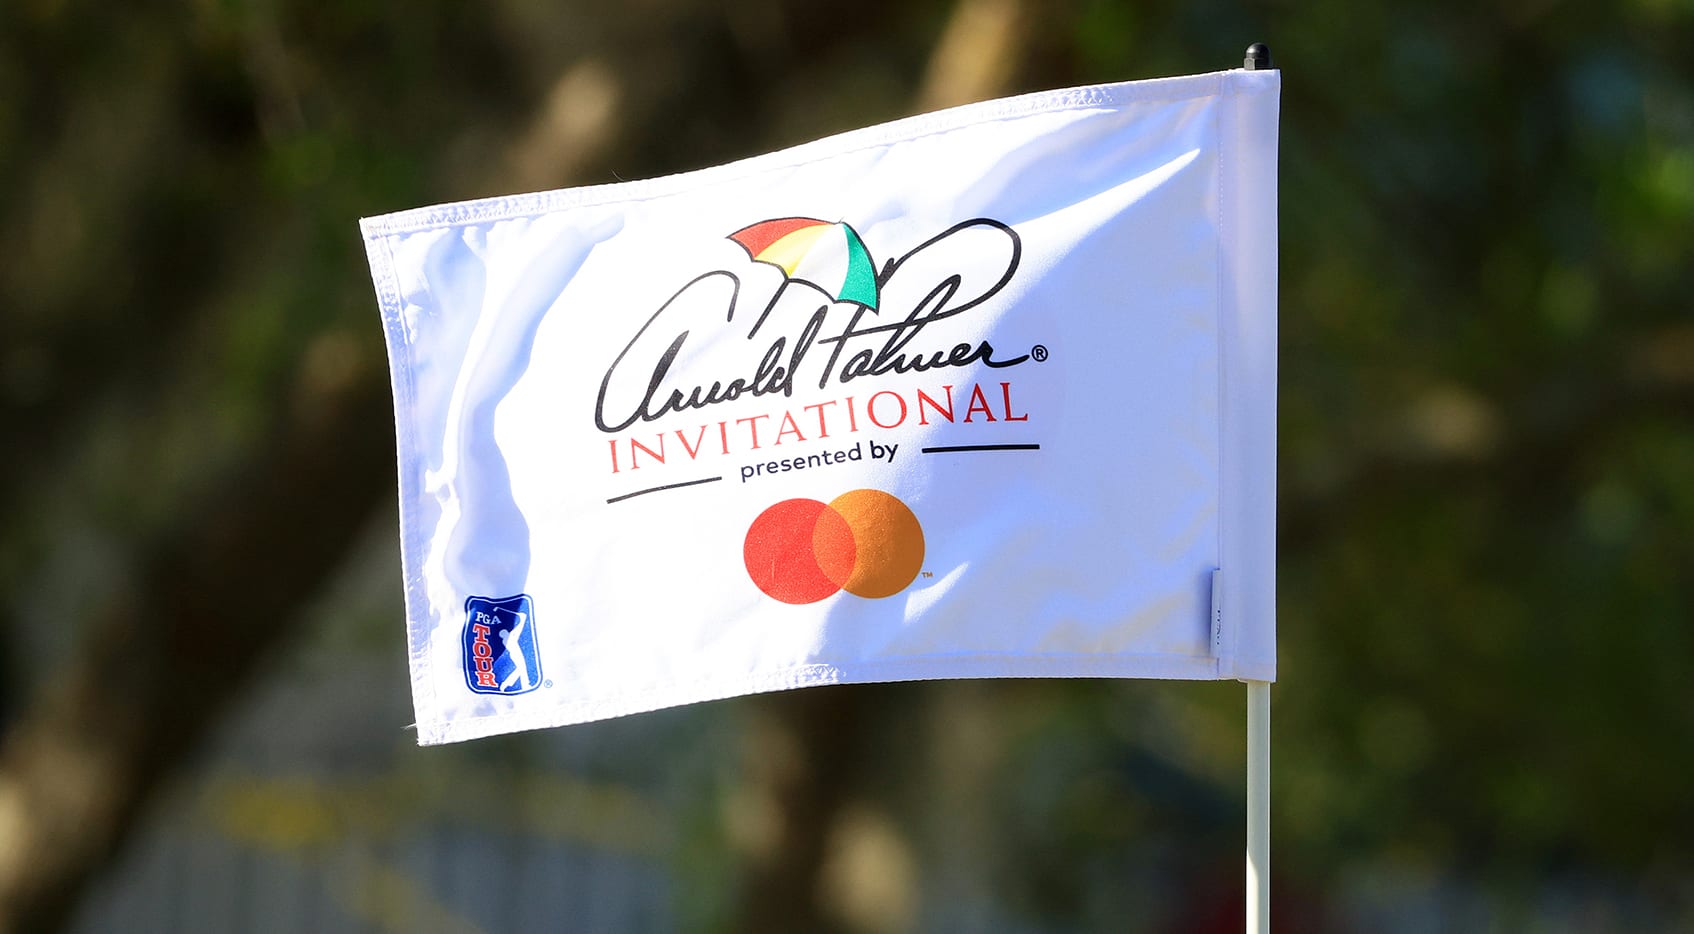 How to watch the Arnold Palmer Invitational presented by Mastercard, Round 2 Featured Groups, live scores, tee times, TV times